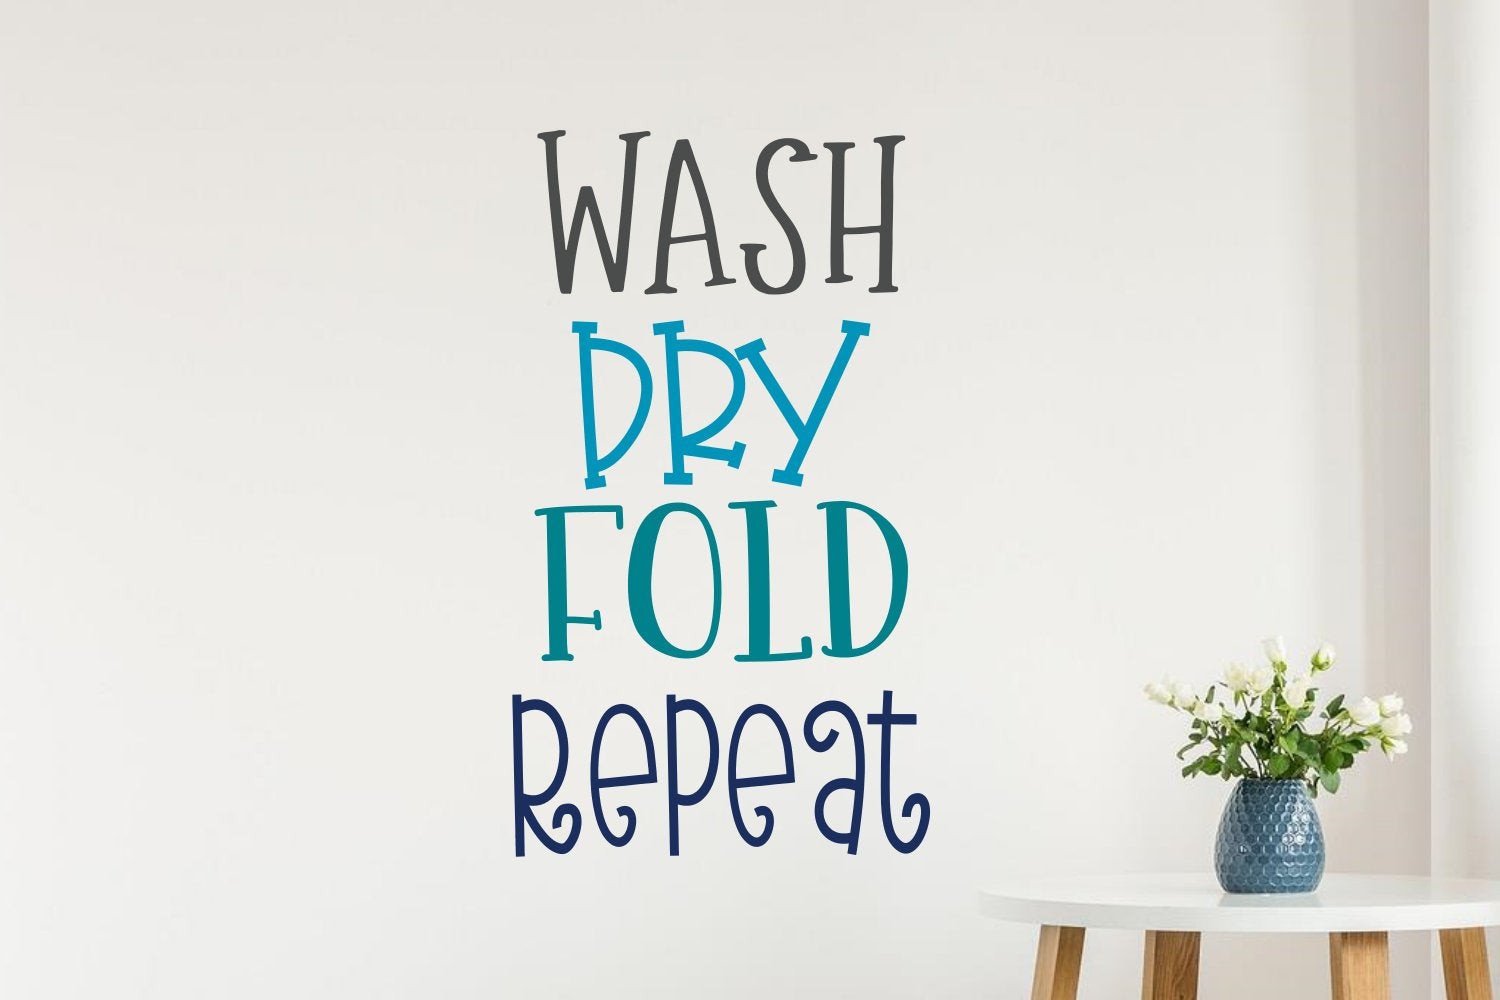 Bedroom Wall Art Stickers Best Of Multi Color Wash Dry Fold Repeat Decal Wash Dry Fold Repeat Wall Decal Laundry Room Decal Laundry Decals Laundry Room Decor Laundry Art